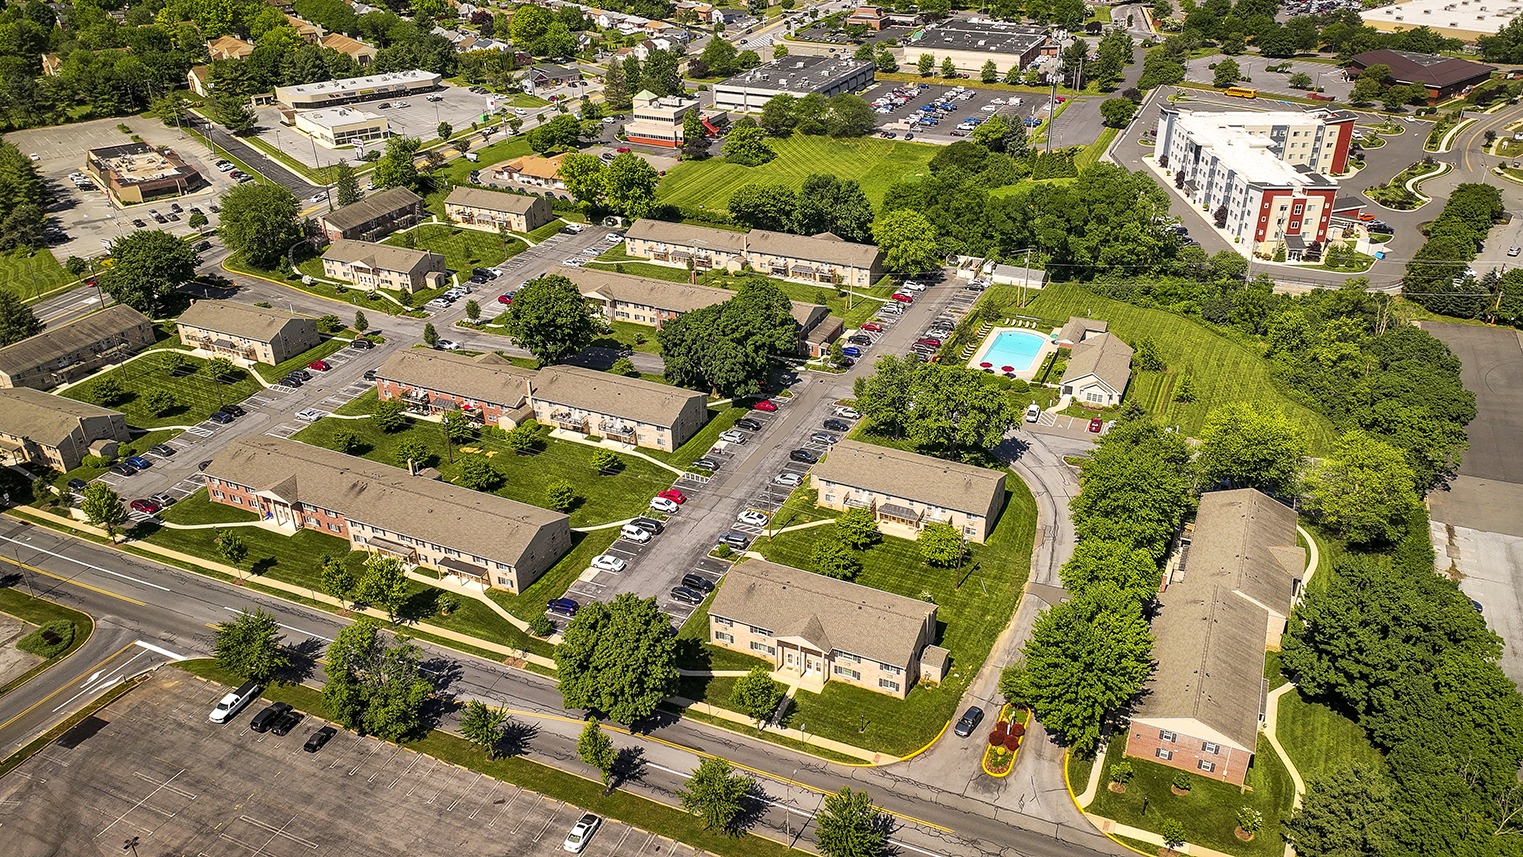 Drone view of Woodland Plaza apartment complex in Wyomissing, PA